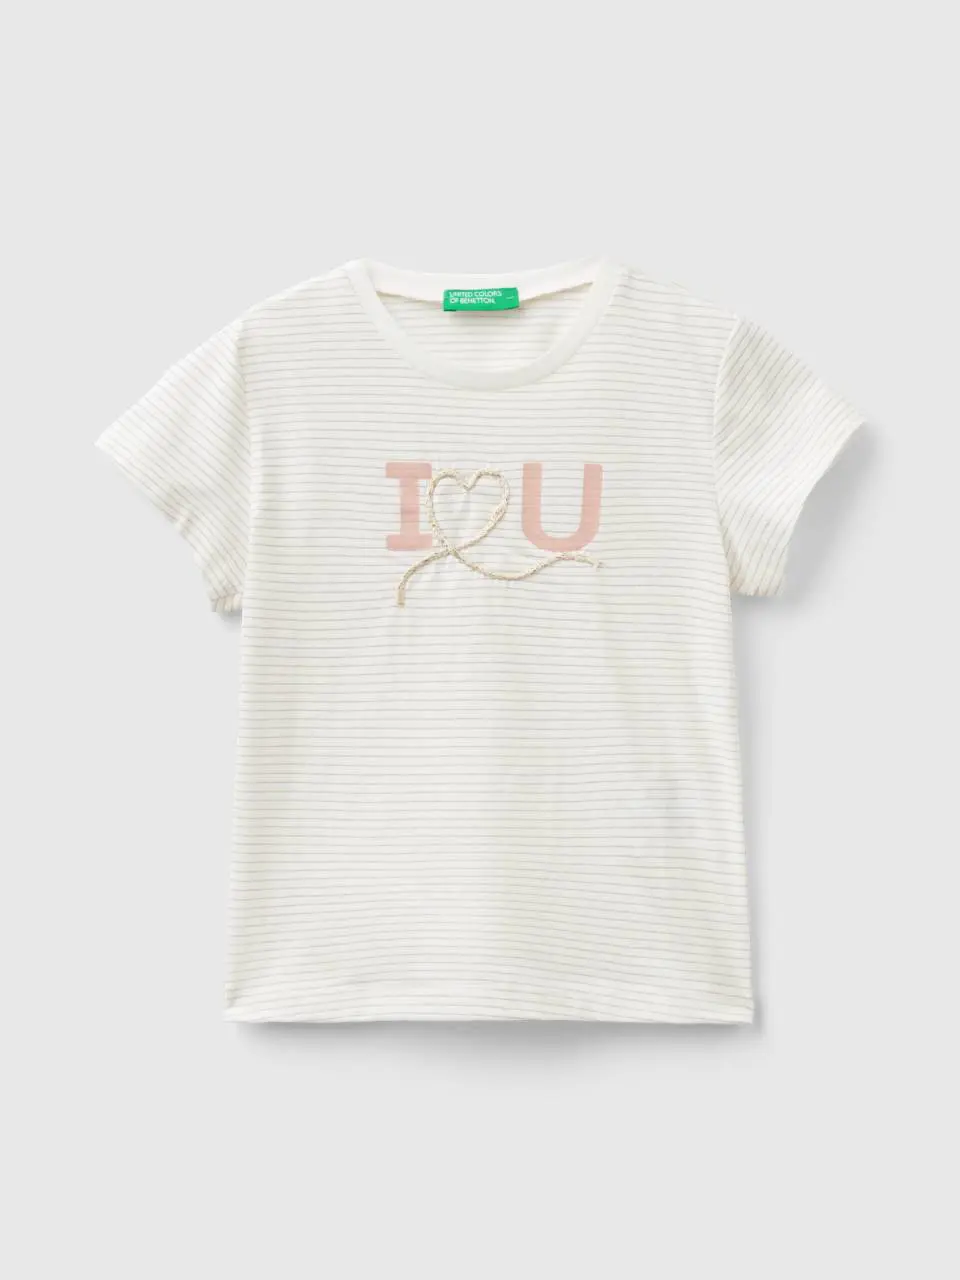 Benetton t-shirt with cord embroidery. 1